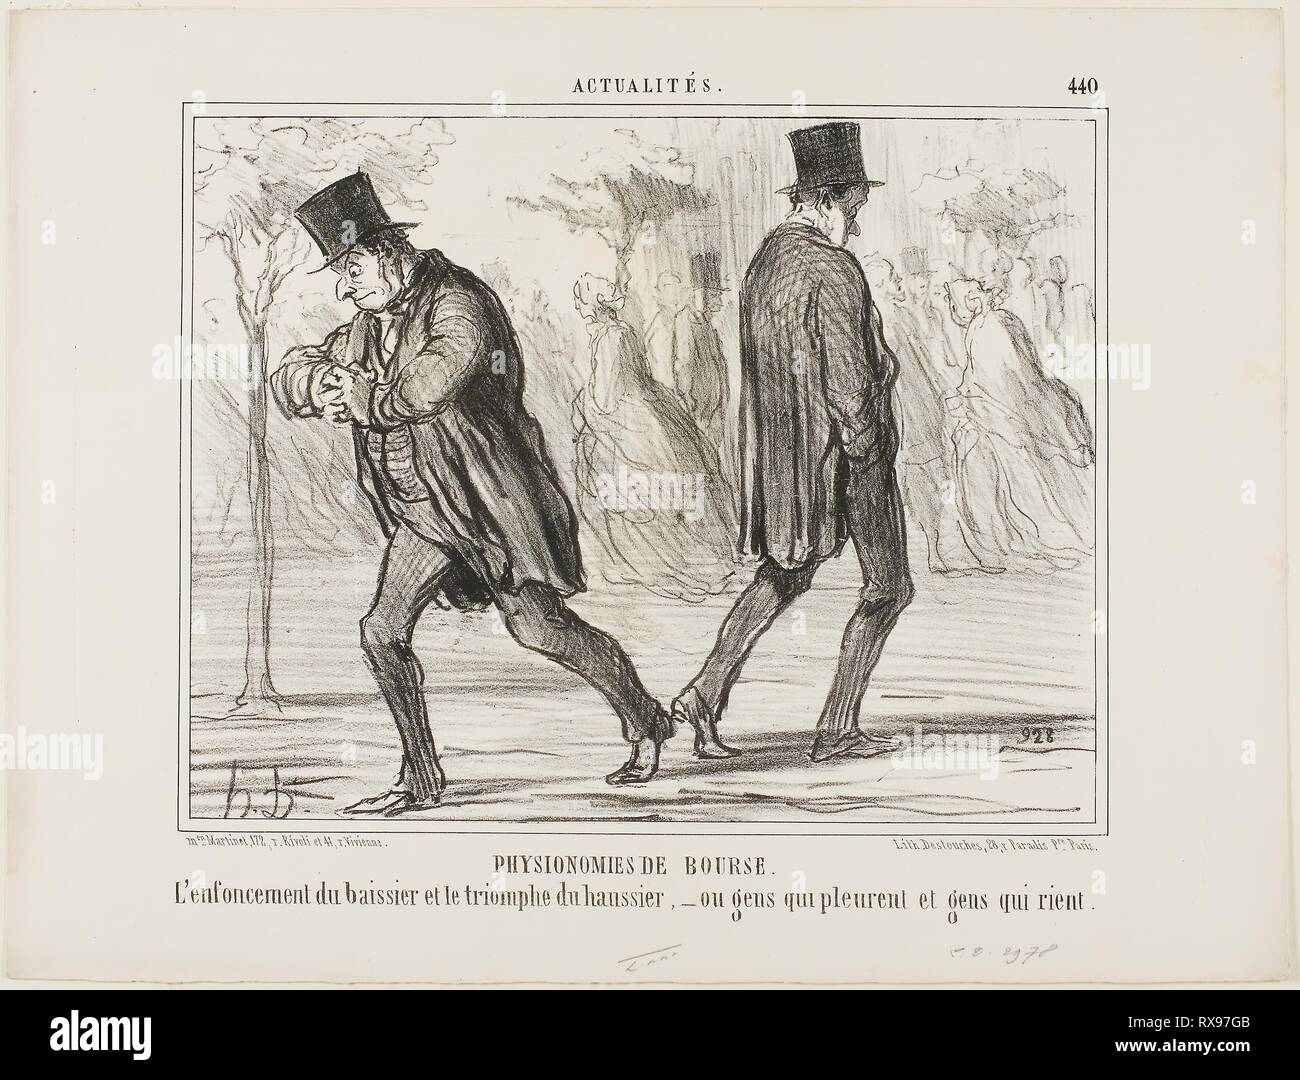 Physiognomy of the Stock Exchange. The despair of the baissier and the triumph of the haussier - or crying and laughing, plate 440 from Actualités. Honoré Victorin Daumier; French, 1808-1879. Date: 1857. Dimensions: 199 × 254 mm (image); 273 × 359 mm (sheet). Lithograph in black on white wove paper. Origin: France. Museum: The Chicago Art Institute. Author: Honoré-Victorin Daumier. Stock Photo